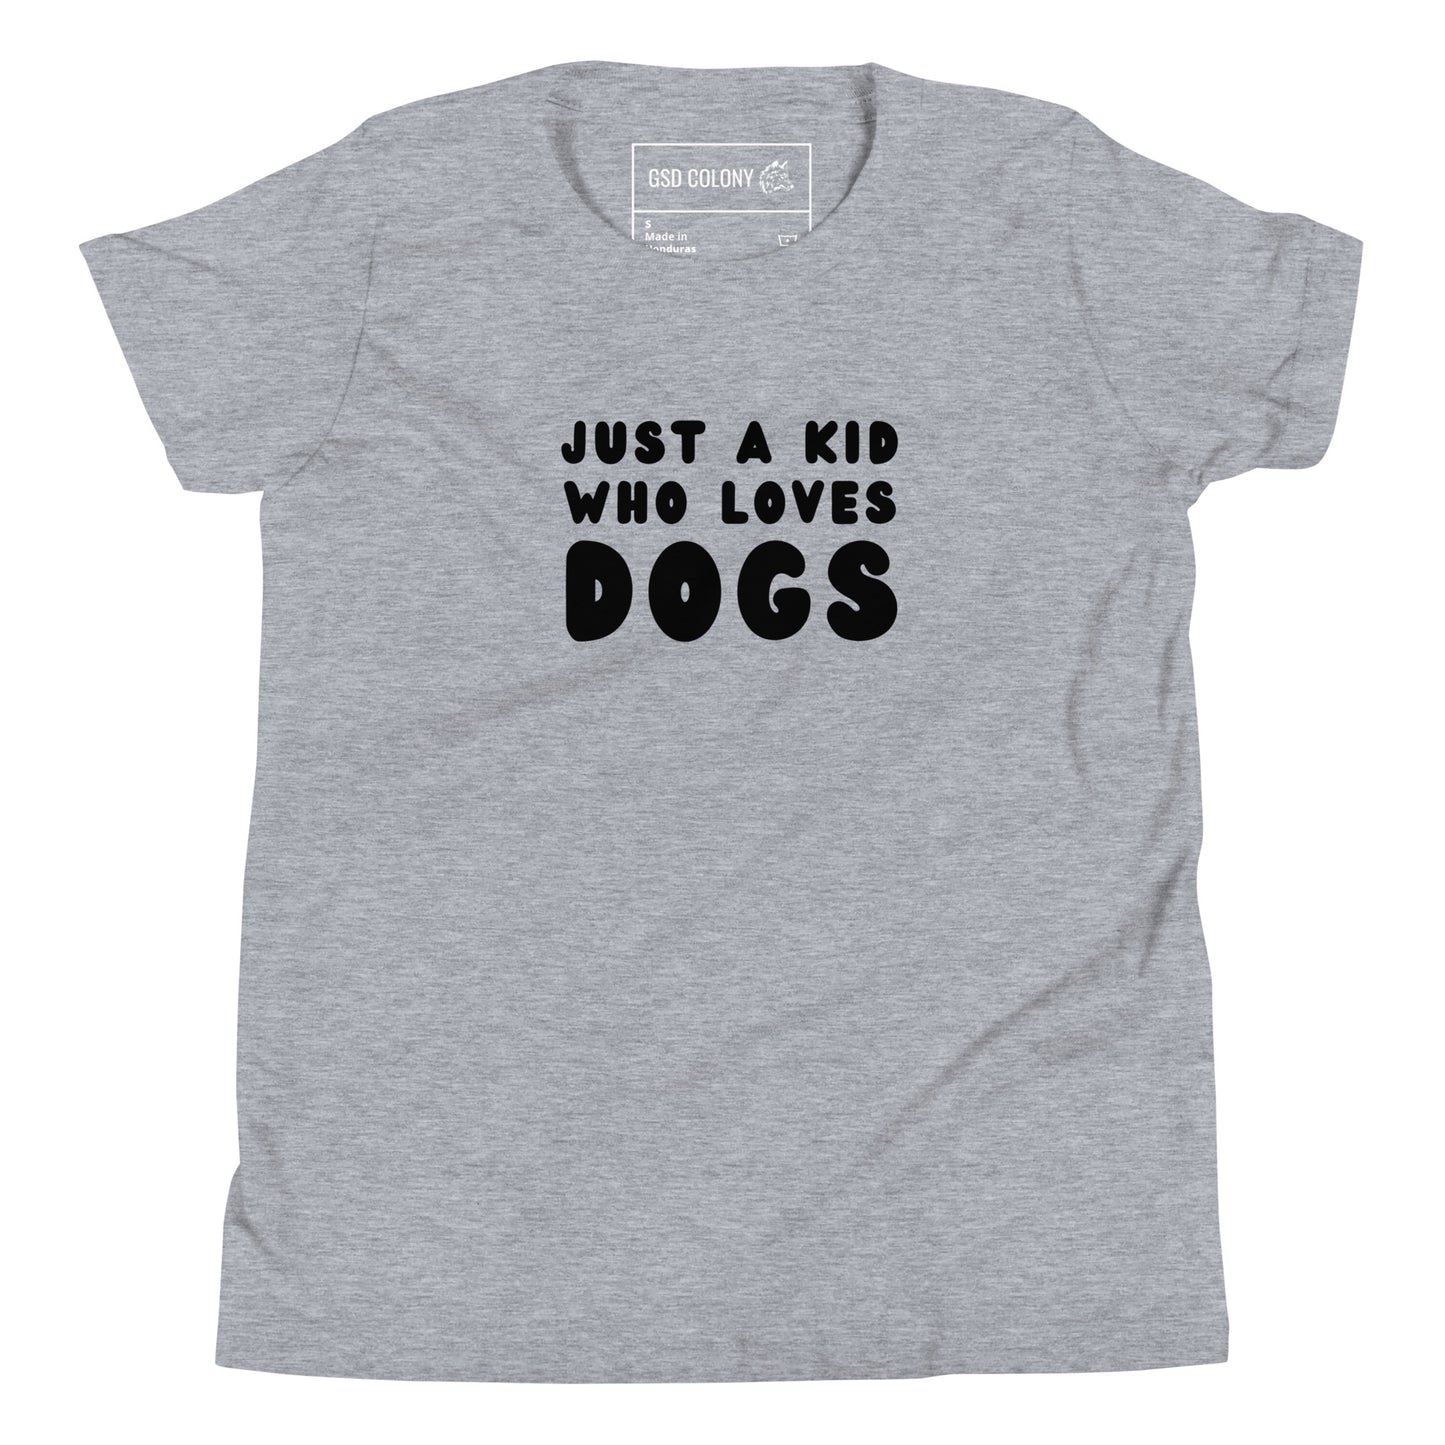 Just a kid who loves dogs kid tshirt for German Shepherd lovers, grey color - GSD Colony